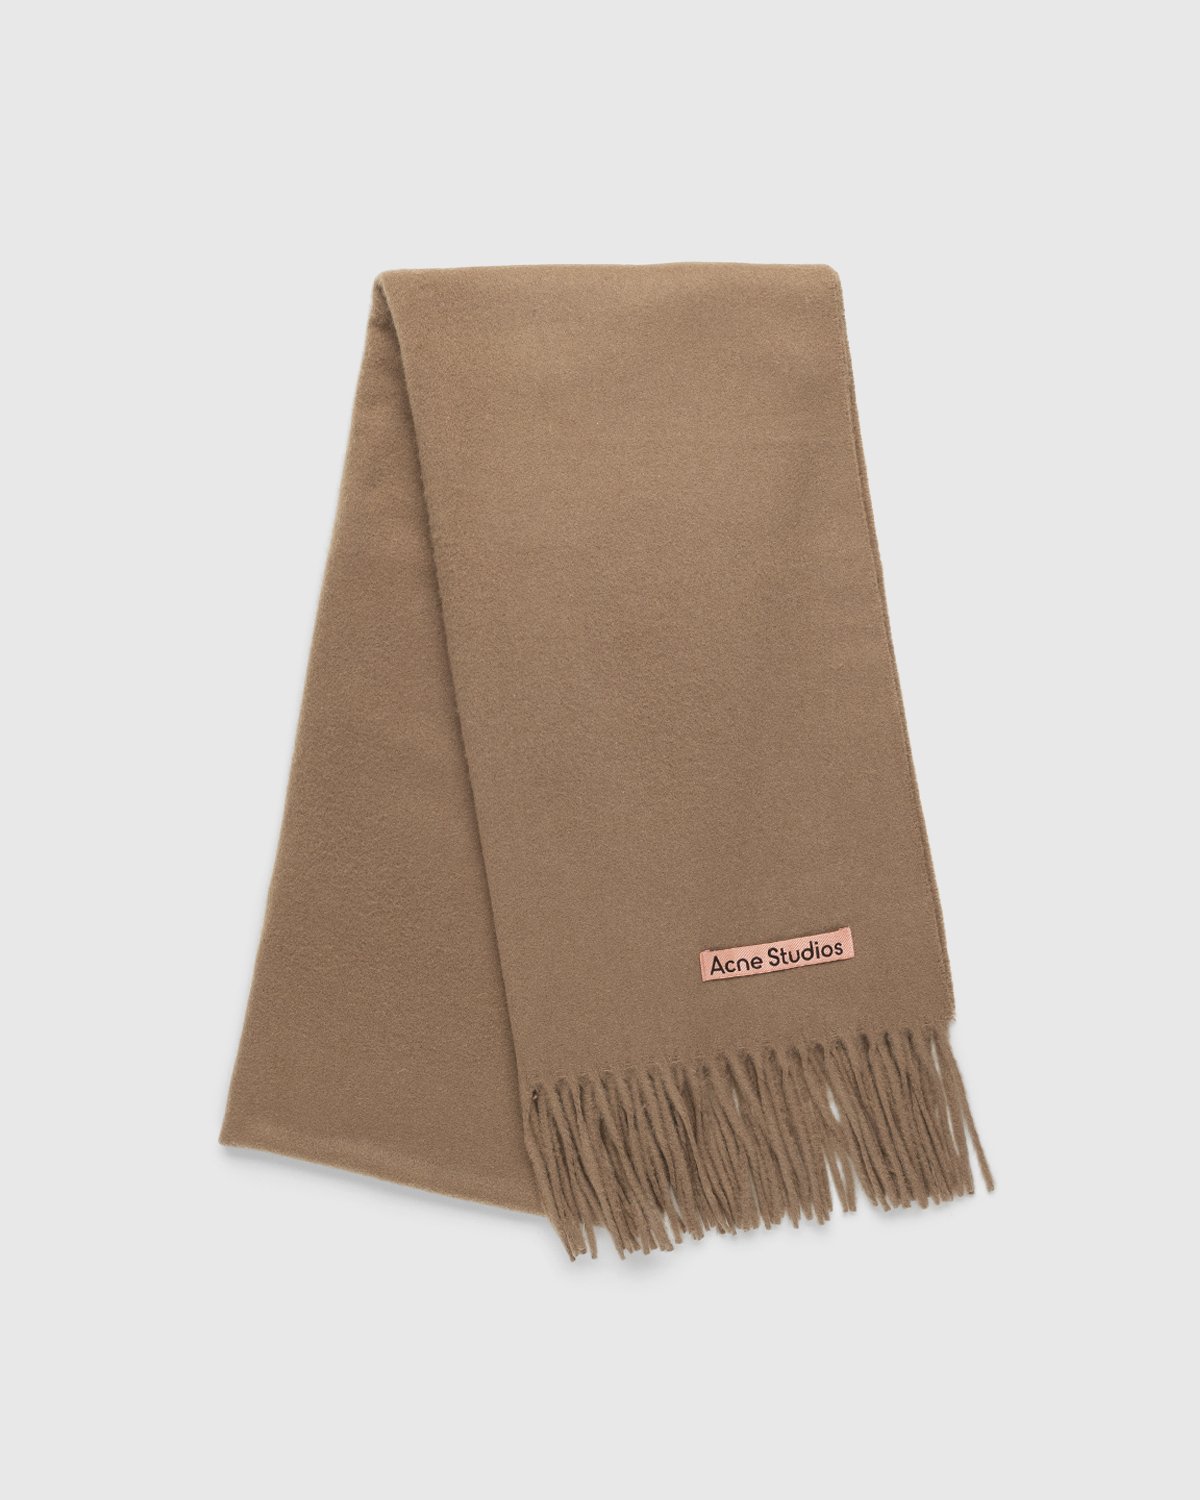 Acne Studios - Narrow Cashmere Scarf Caramel Brown - Accessories - Brown - Image 1